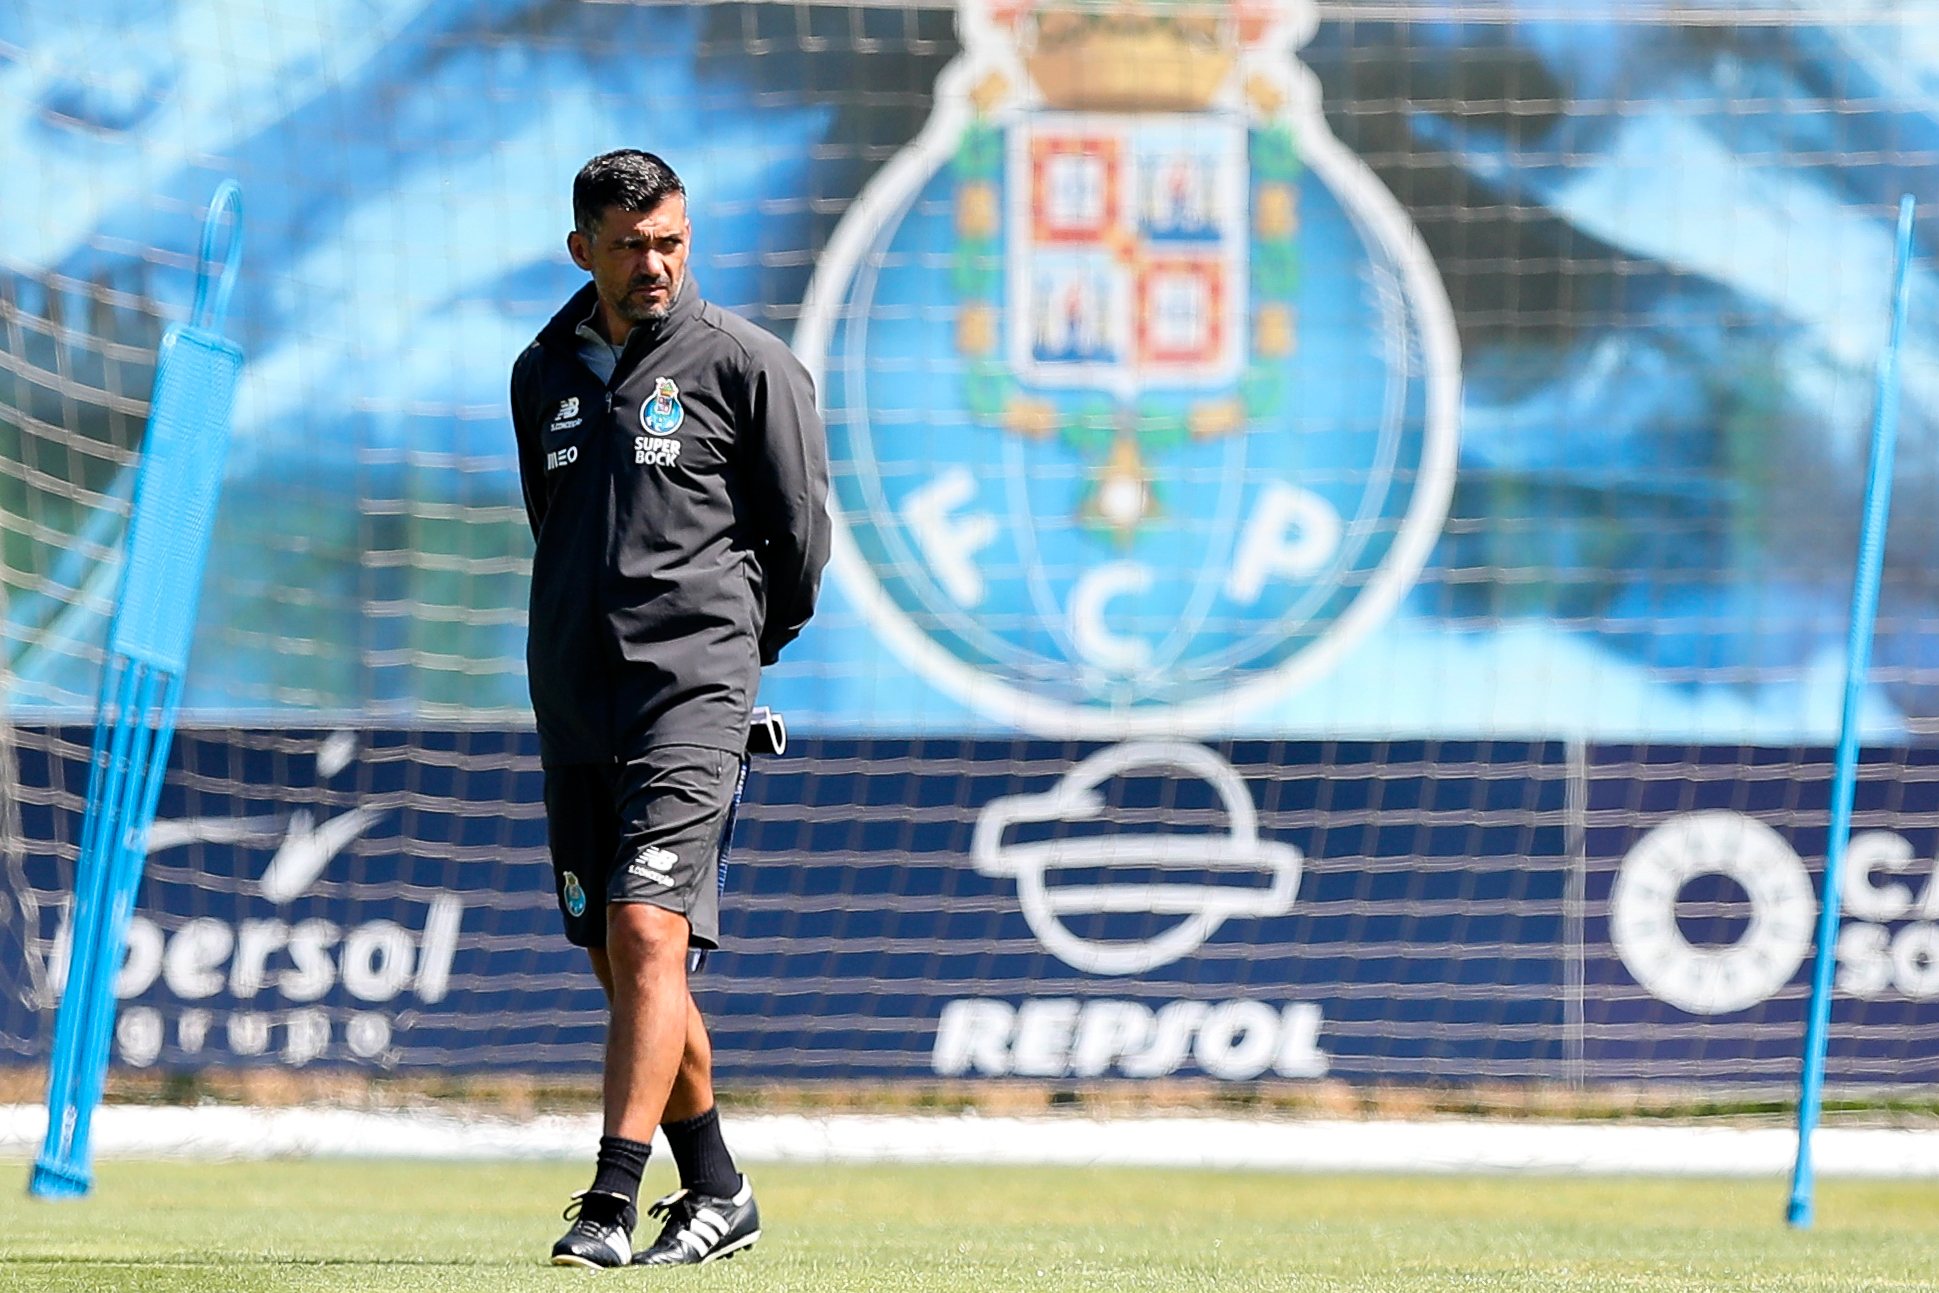 FC Porto&#039;s head-coach Sergio Conceicao during his team training session, at Olival training center, Vila Nova de Gaia, north of Portugal, 31 July 2020. FC Porto faces Benfica on the 1st August for the Portuguese Cup Final. JOSE COELHO/LUSA